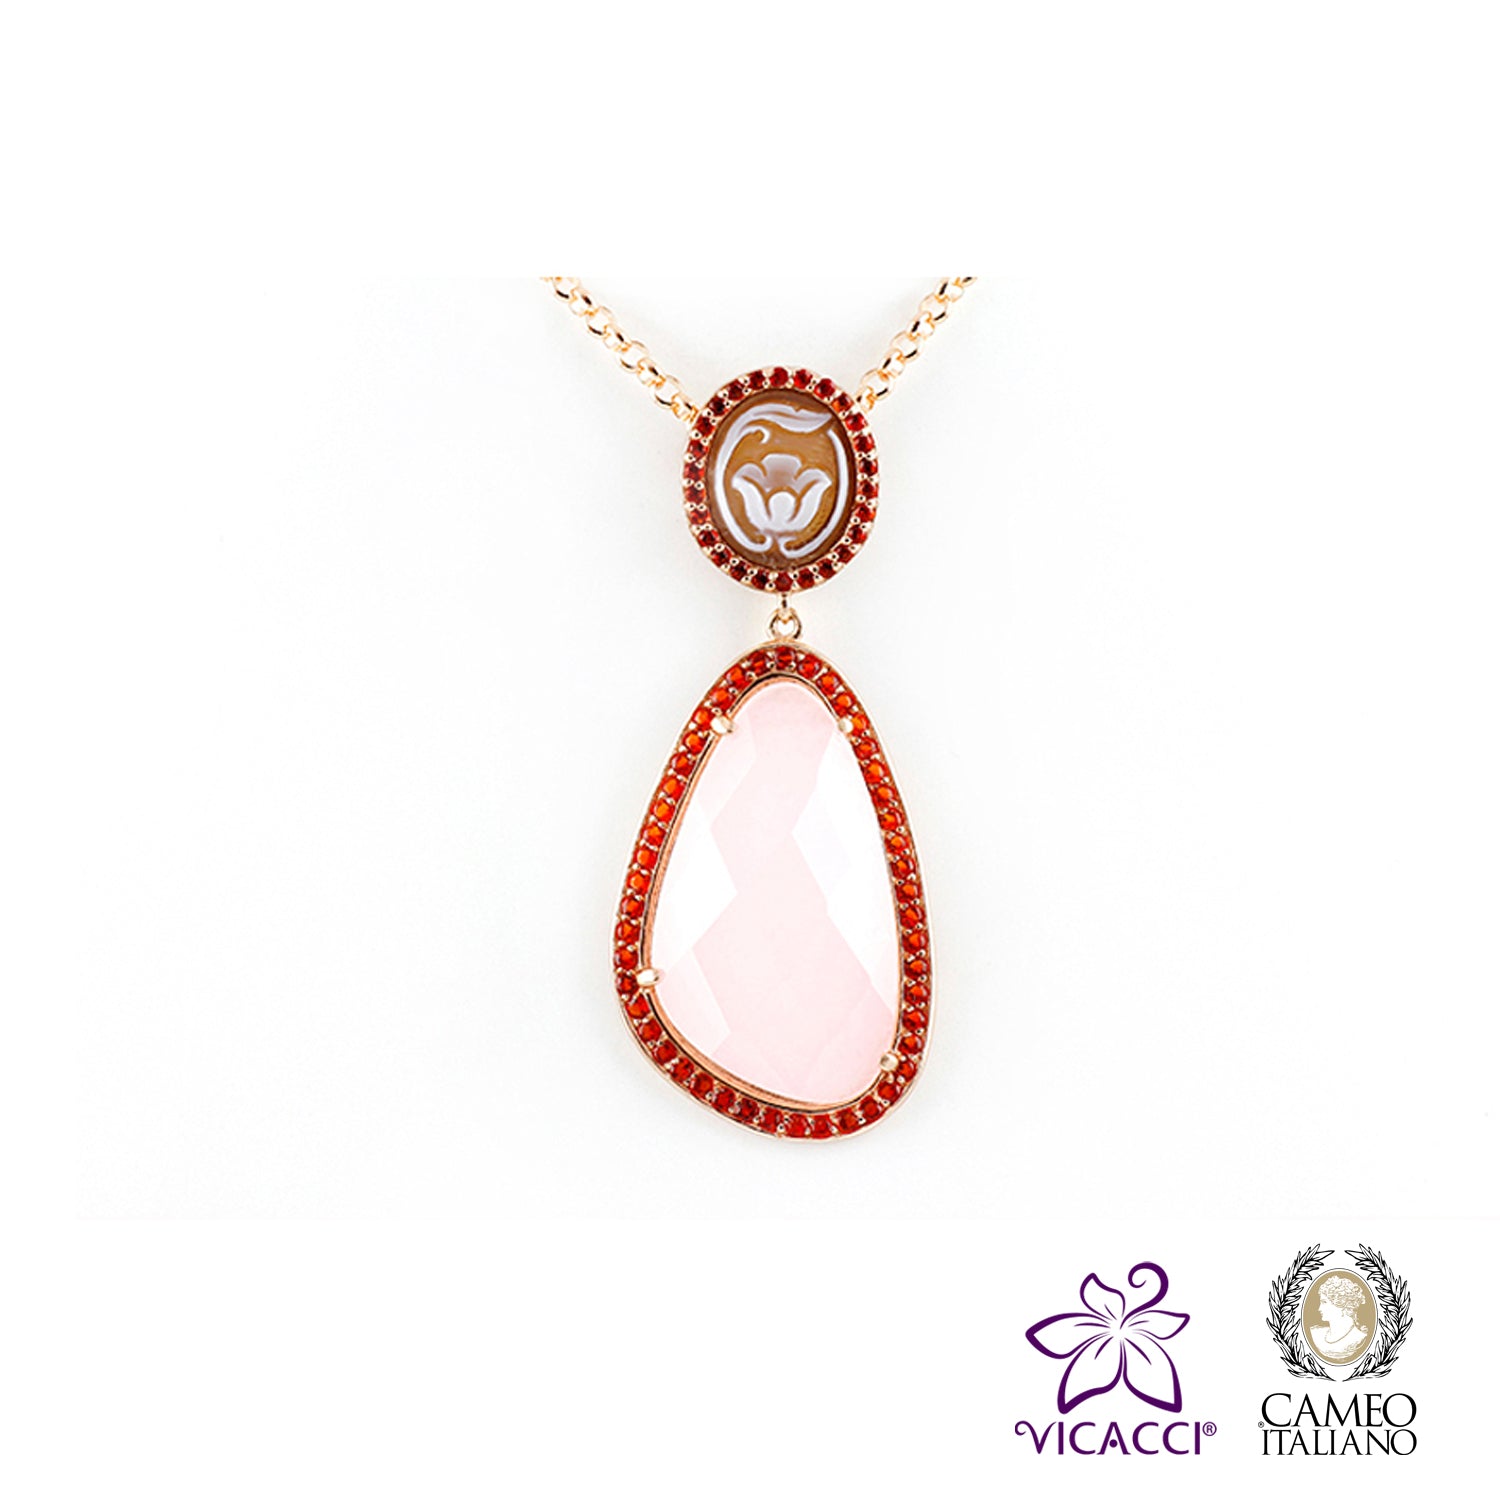 Cameo Italiano, P49P Pendant, Rose Gold Plated Sterling Silver